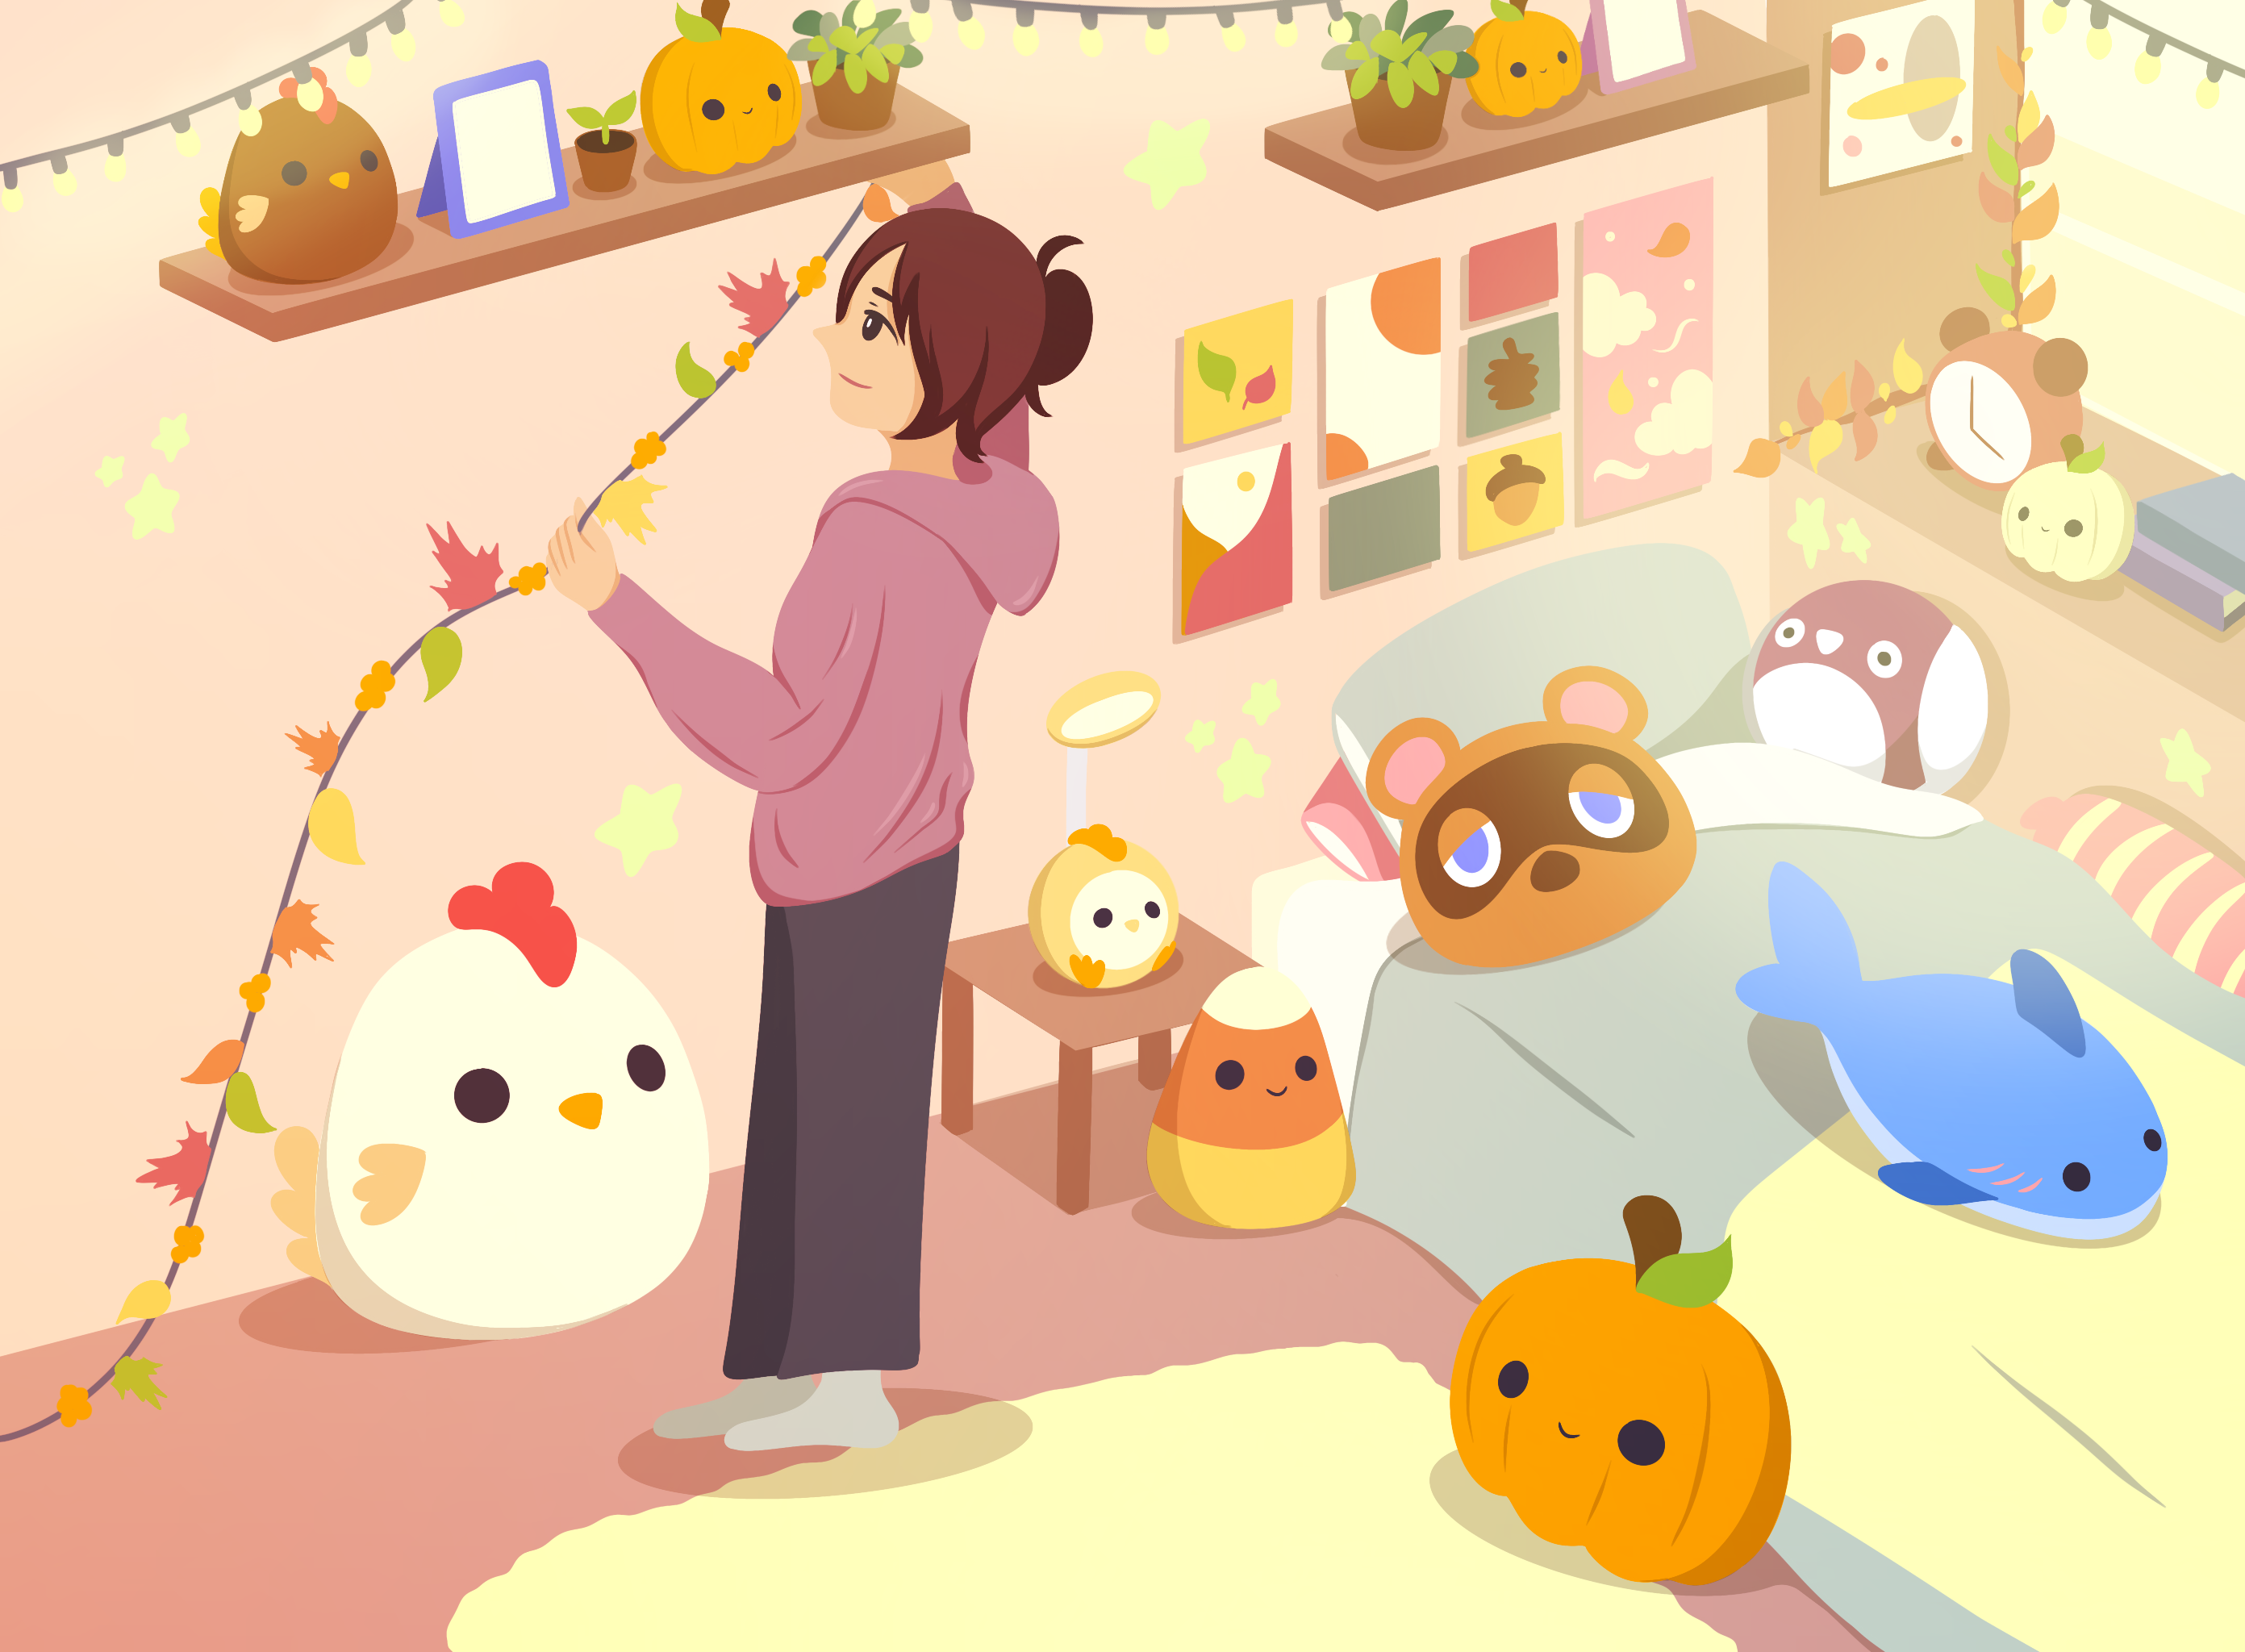 An illustration of a person in oversized pyjamas hanging a string of leaves on a wall in their bedroom.They have turkey and pumpkin plushies on display on a mantle, and other plushies sprawled across their room, including a candy corn plushy.